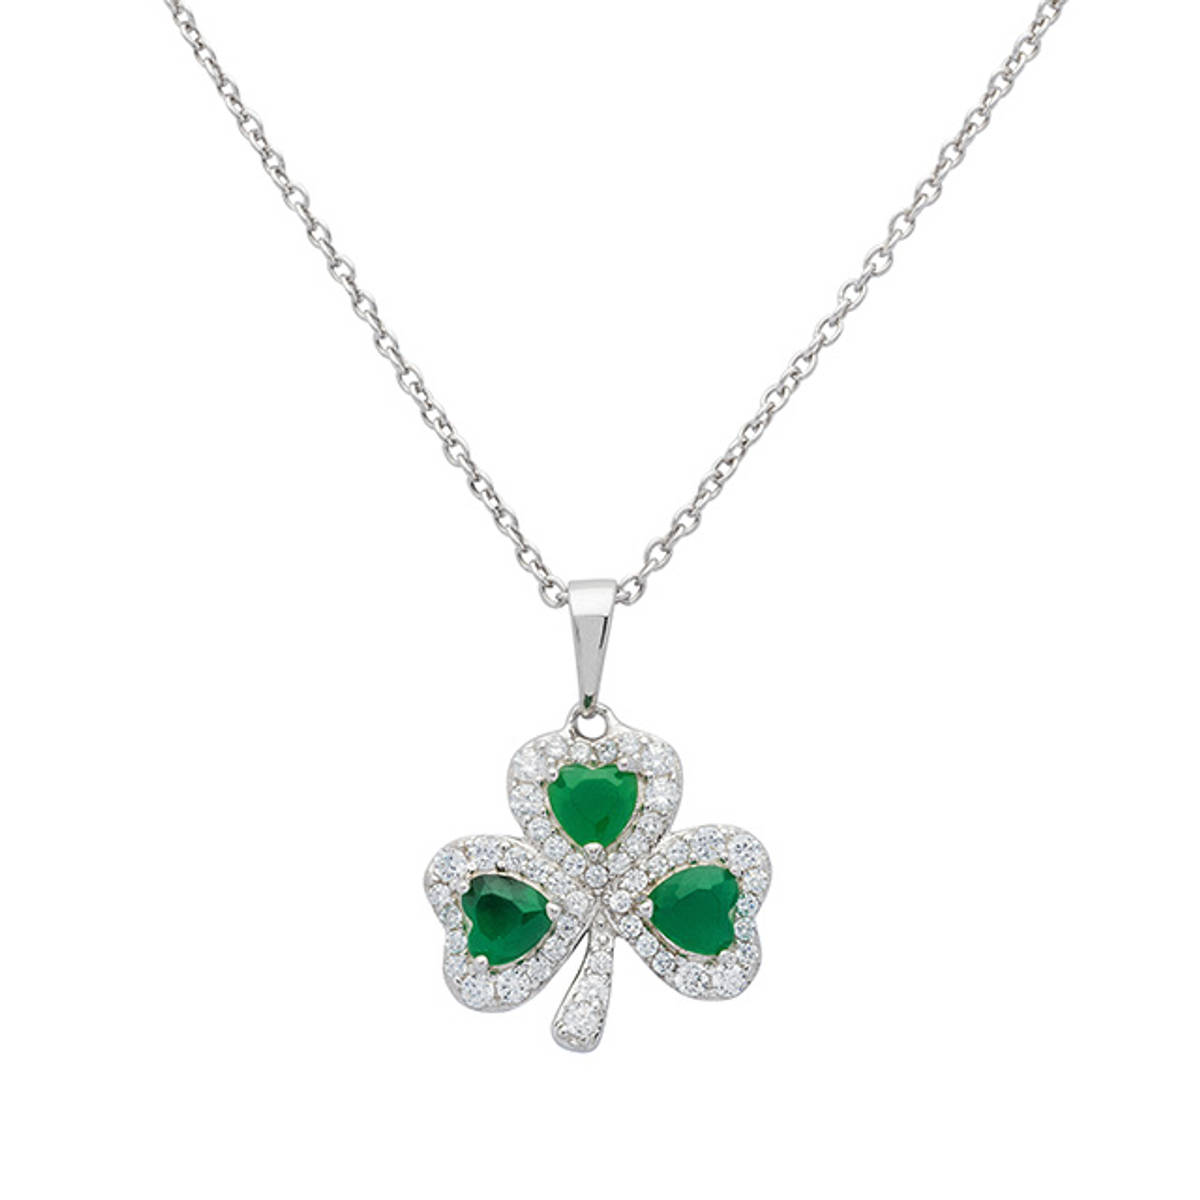 Sterling Silver Green Agate Shamrock Pendant with Cubic Zirconia.

Size: 15mm